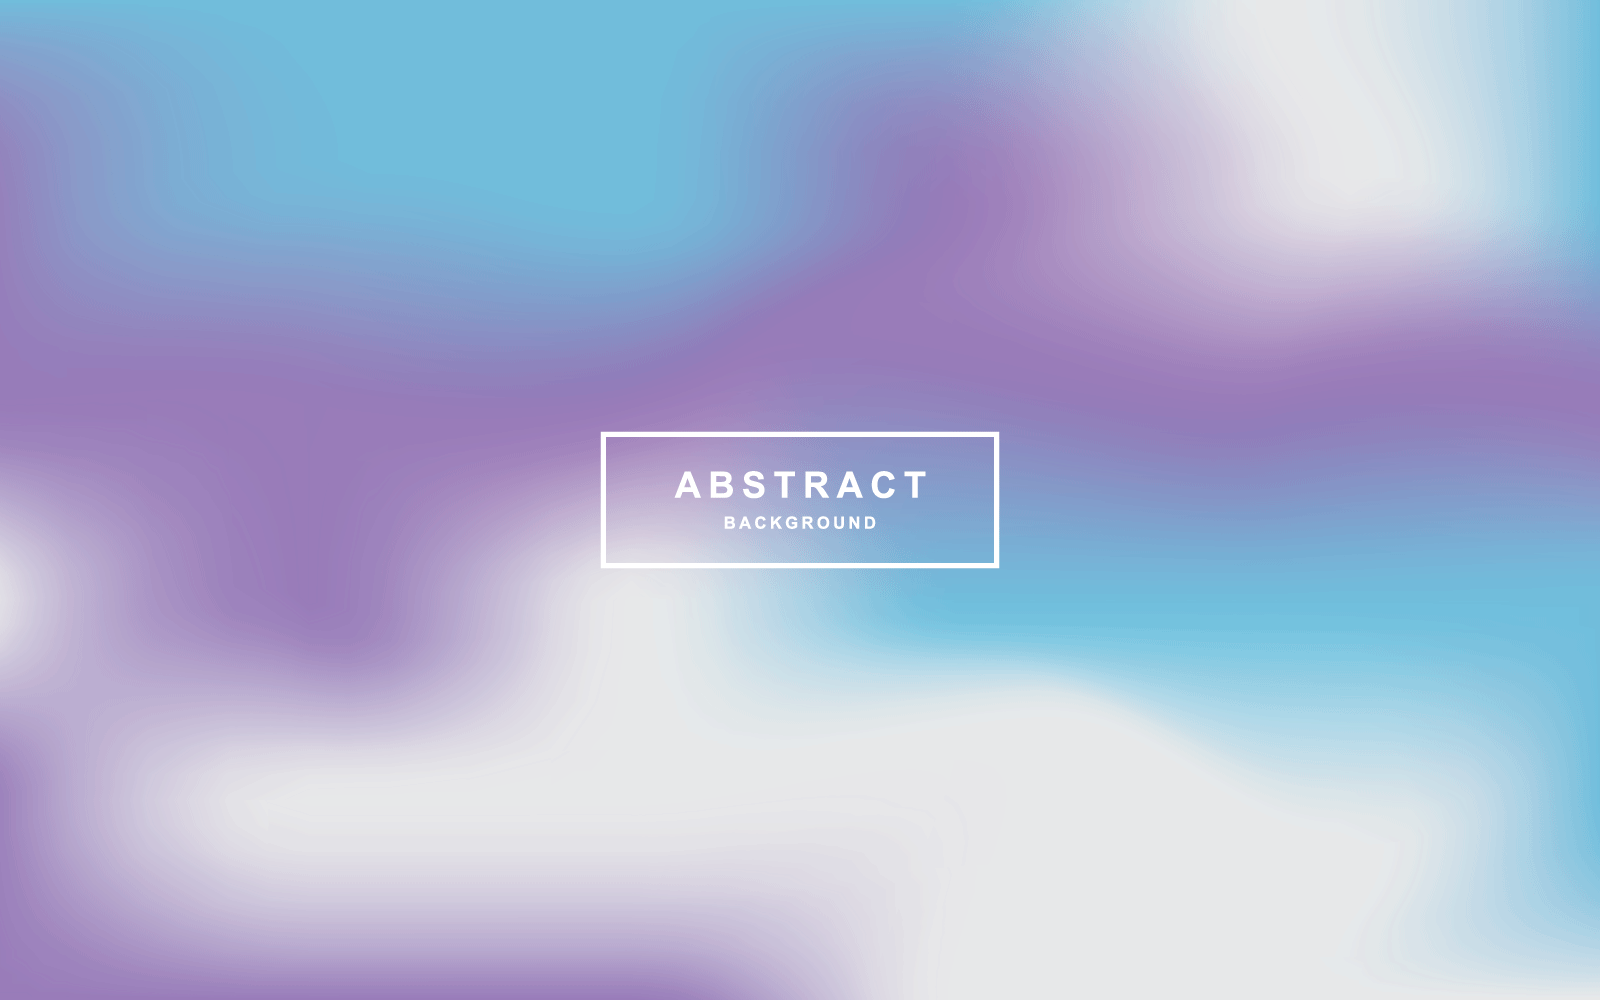 Abstract blurre gradient mesh background logo template